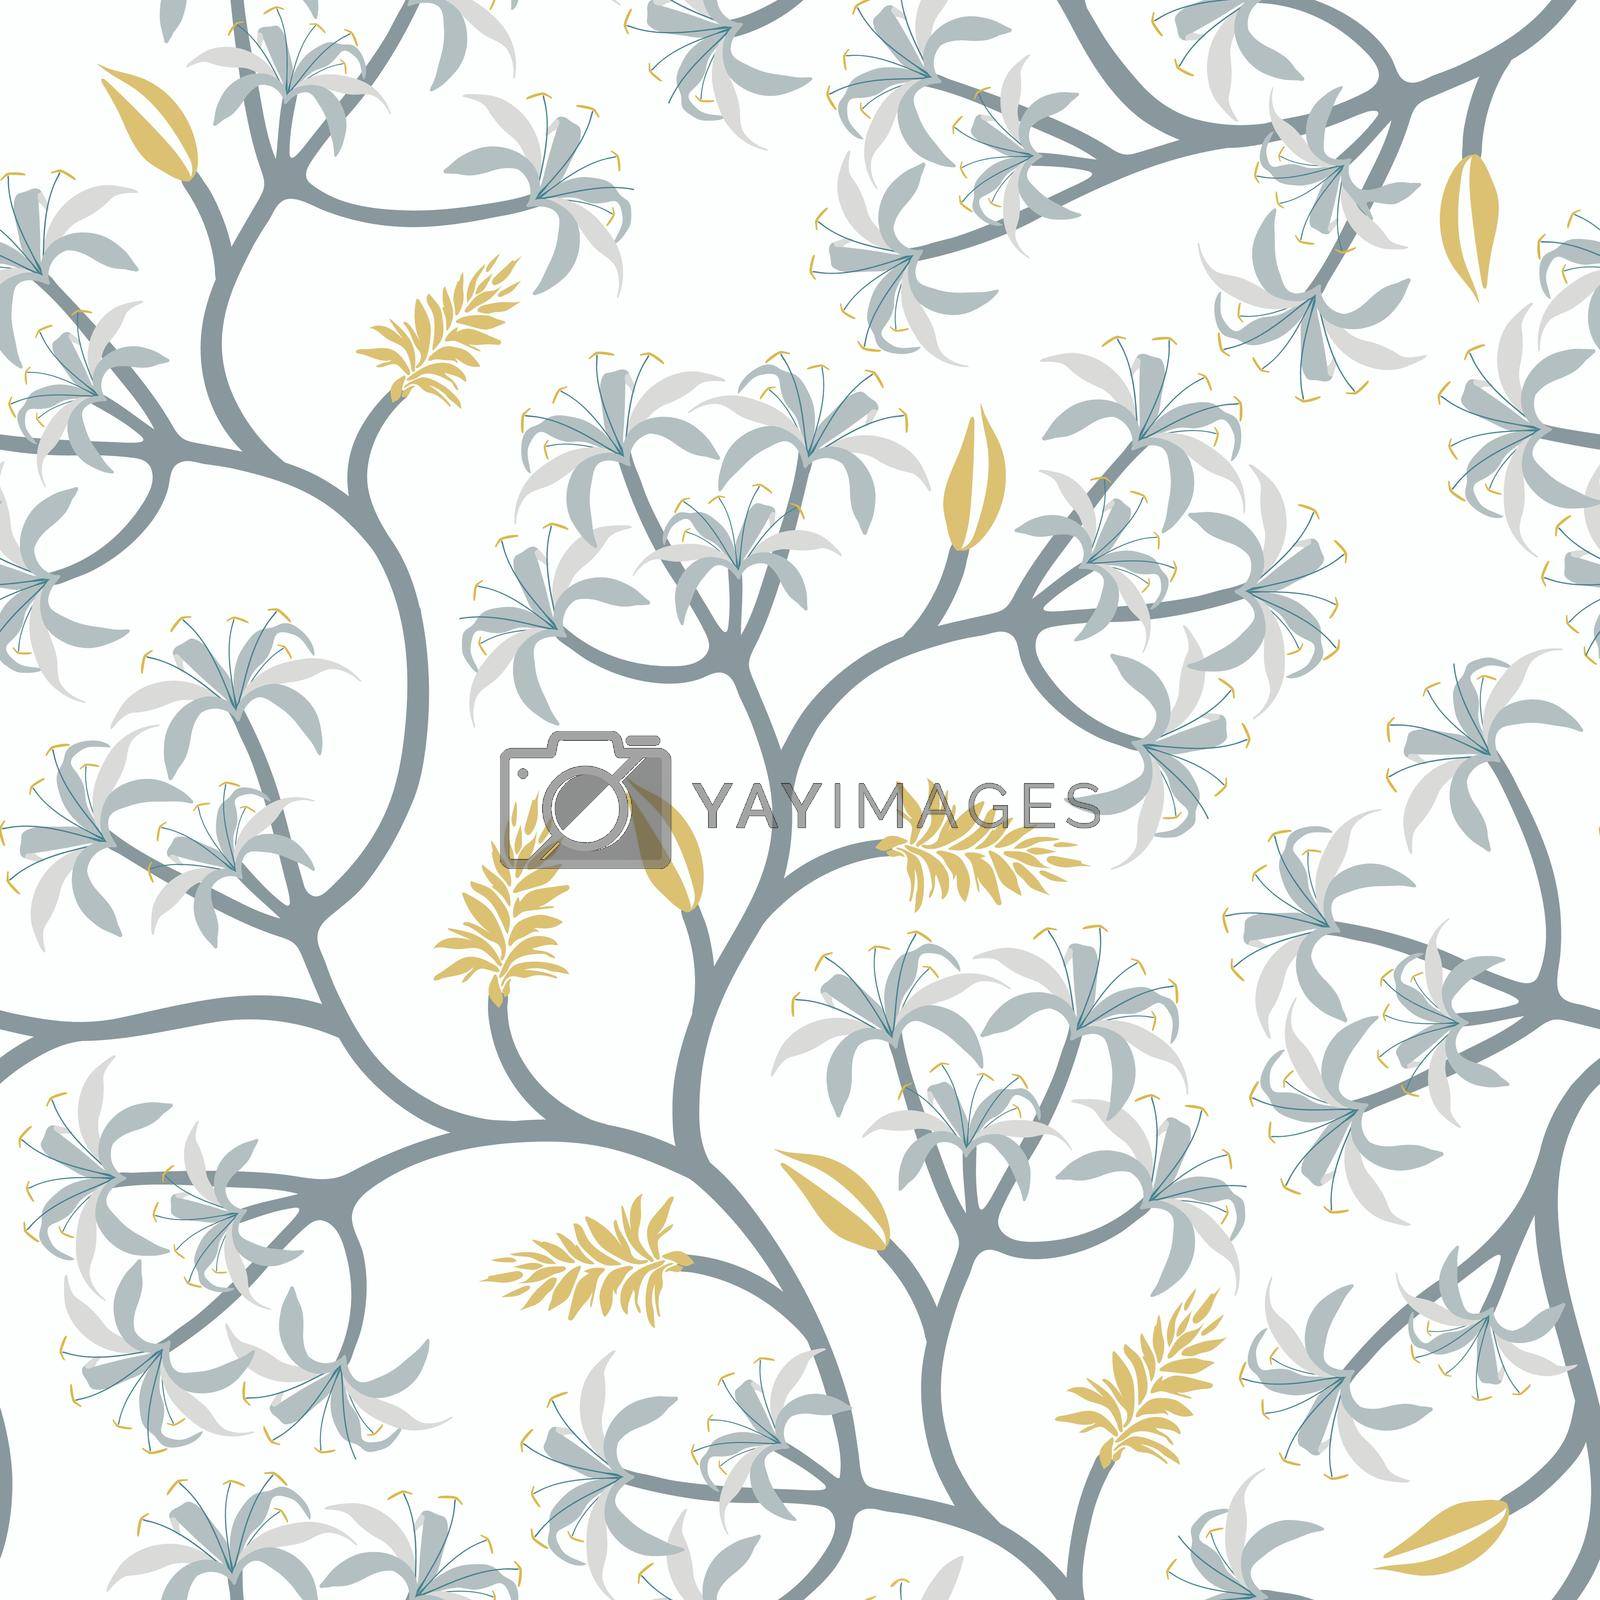 Royalty free image of Nature plant branch wallpaper design by vectorart